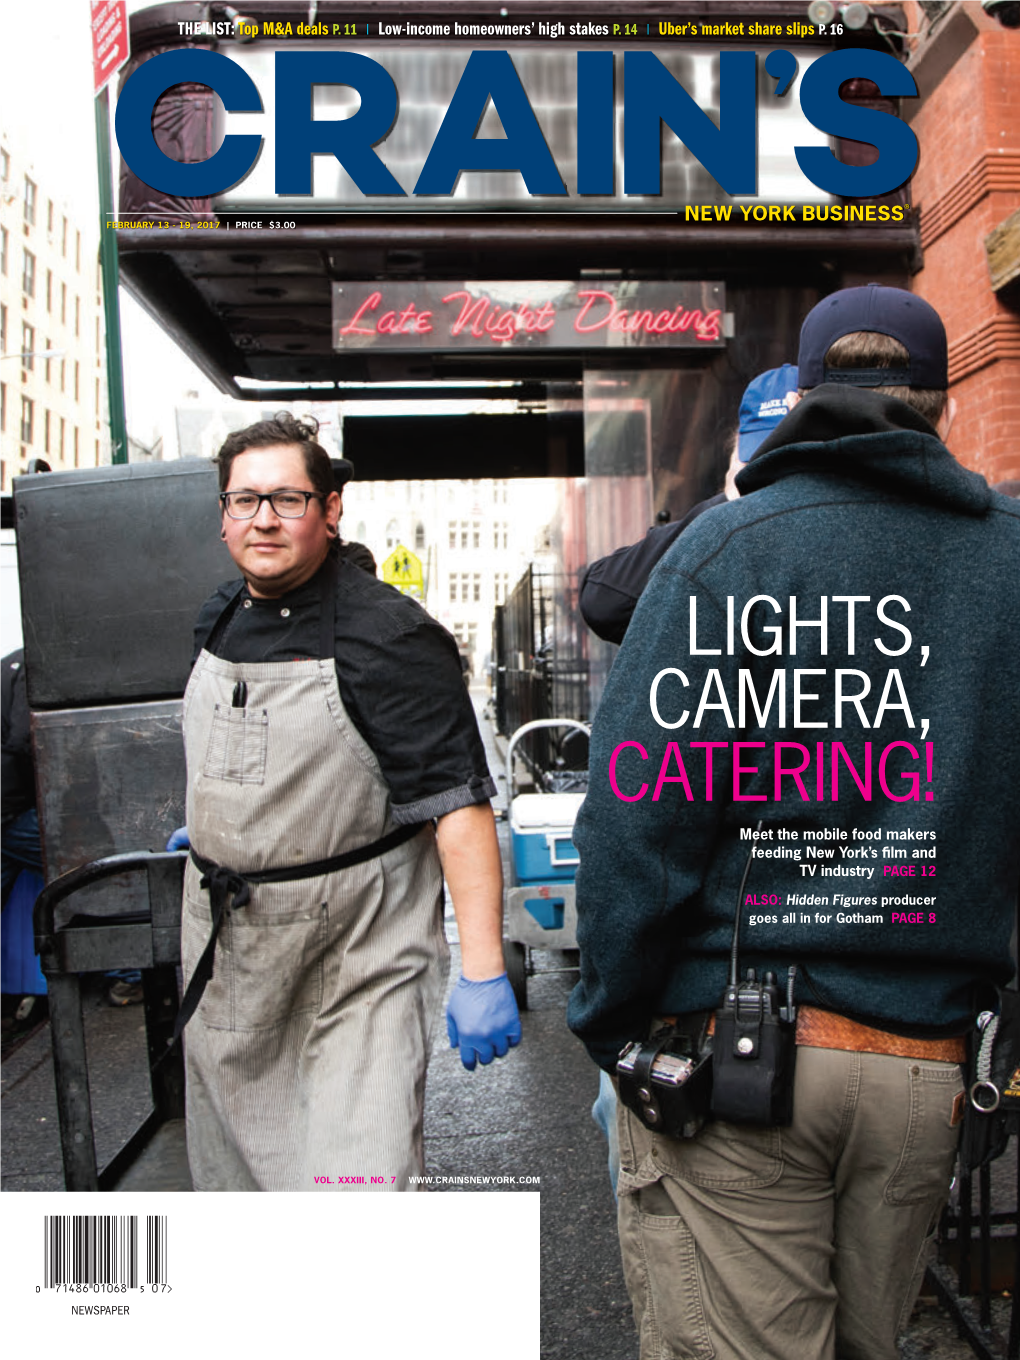 LIGHTS, CAMERA, CATERING! Meet the Mobile Food Makers Feeding New York’S Lm and TV Industry PAGE 12